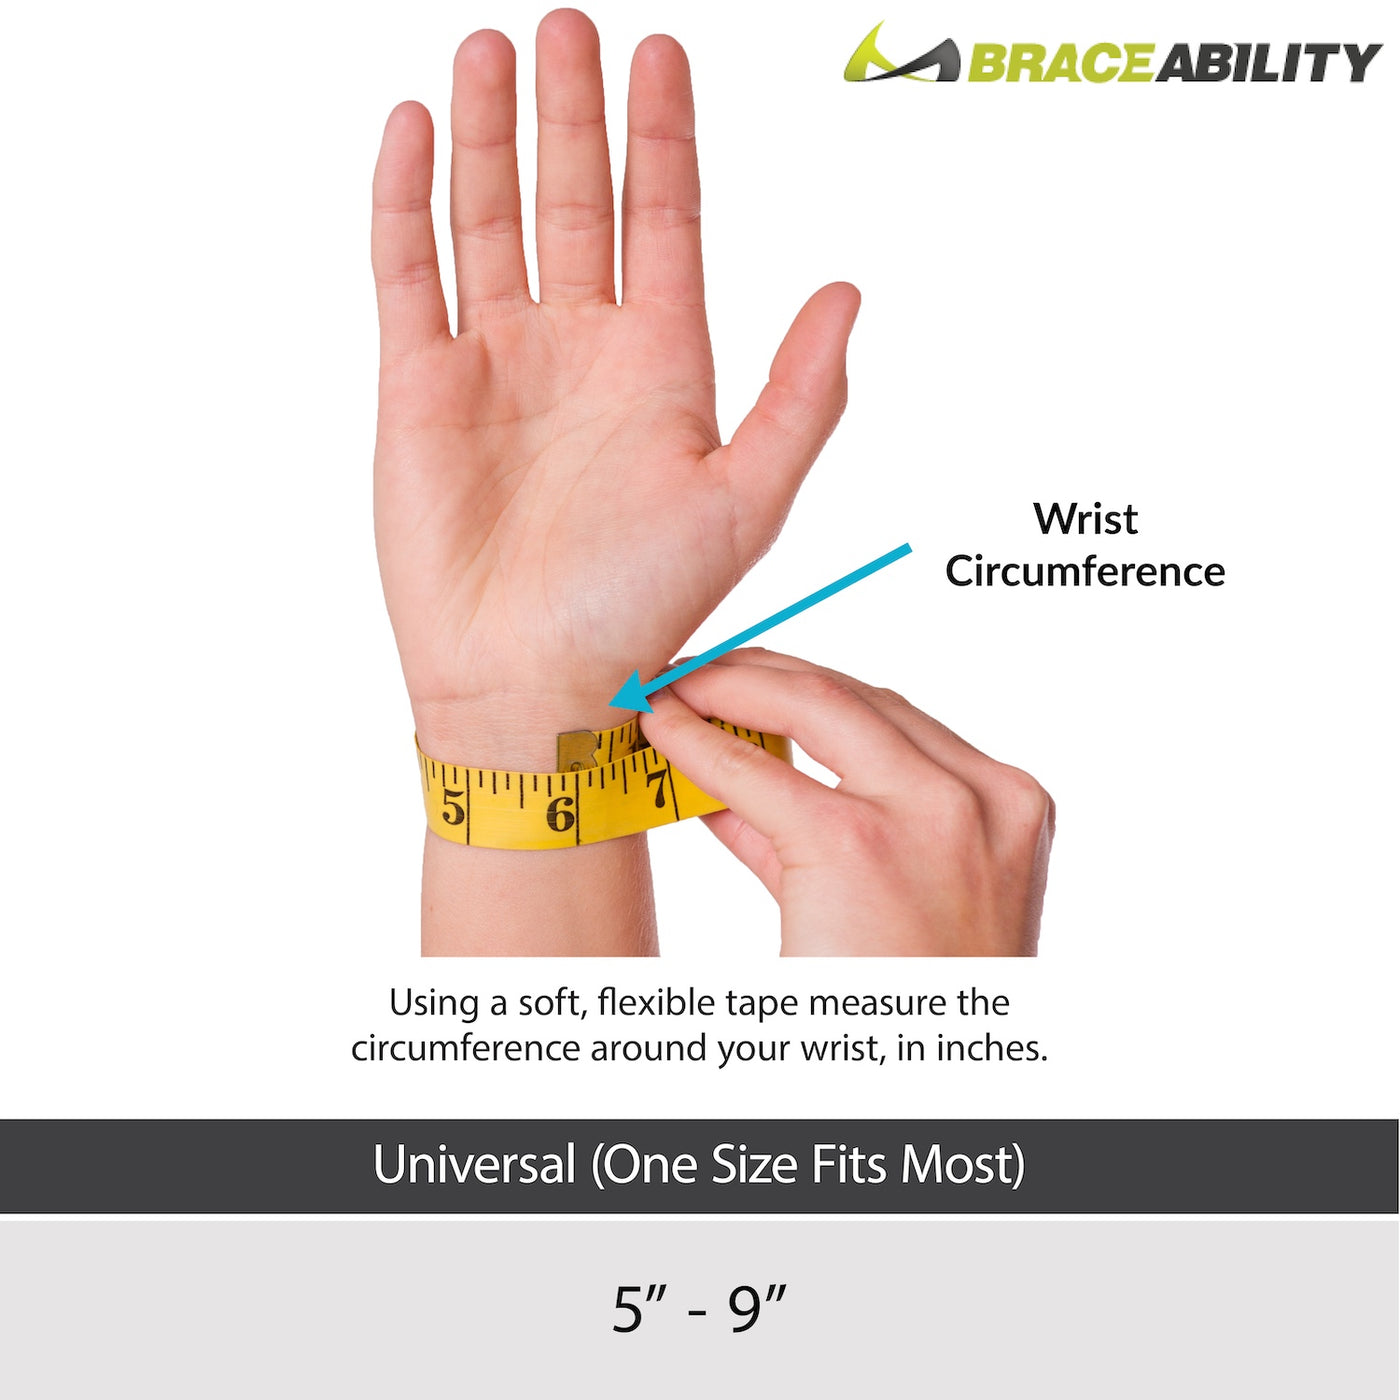 The sizing chart for the universal wrist support fits gymnasts and cheerleaders with wrist circumferences for 5 to 9 inches